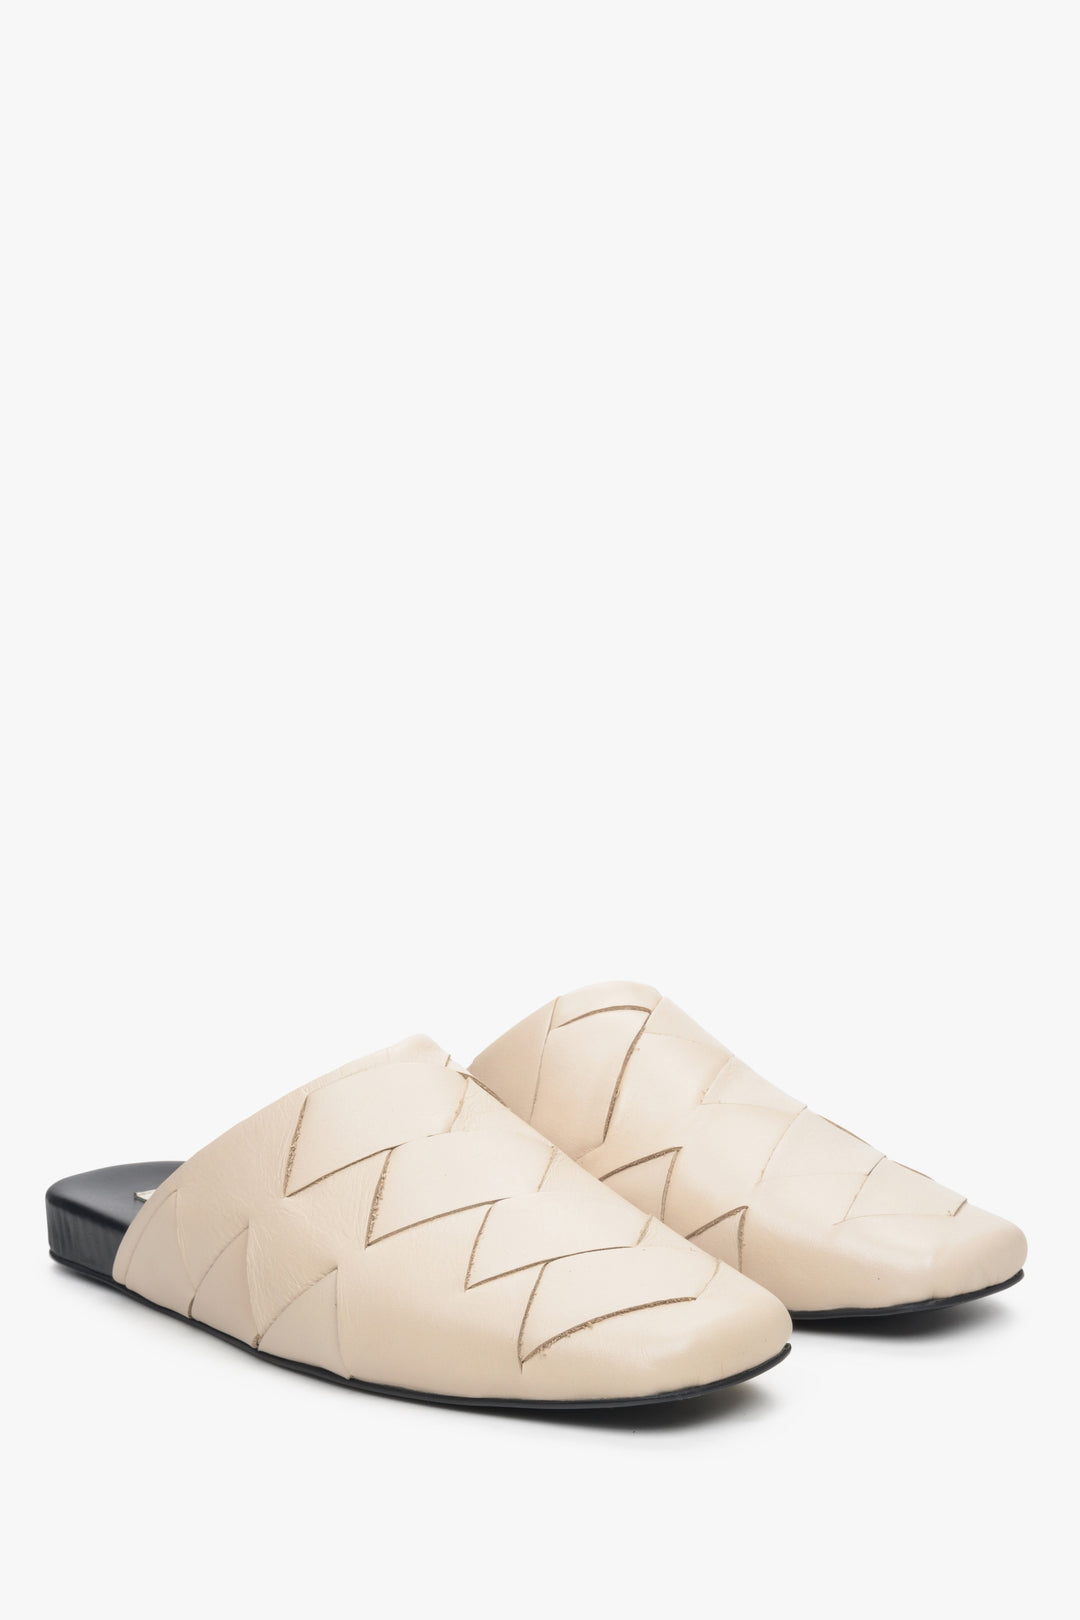 Women's light beige leather slides with a covered toe line.